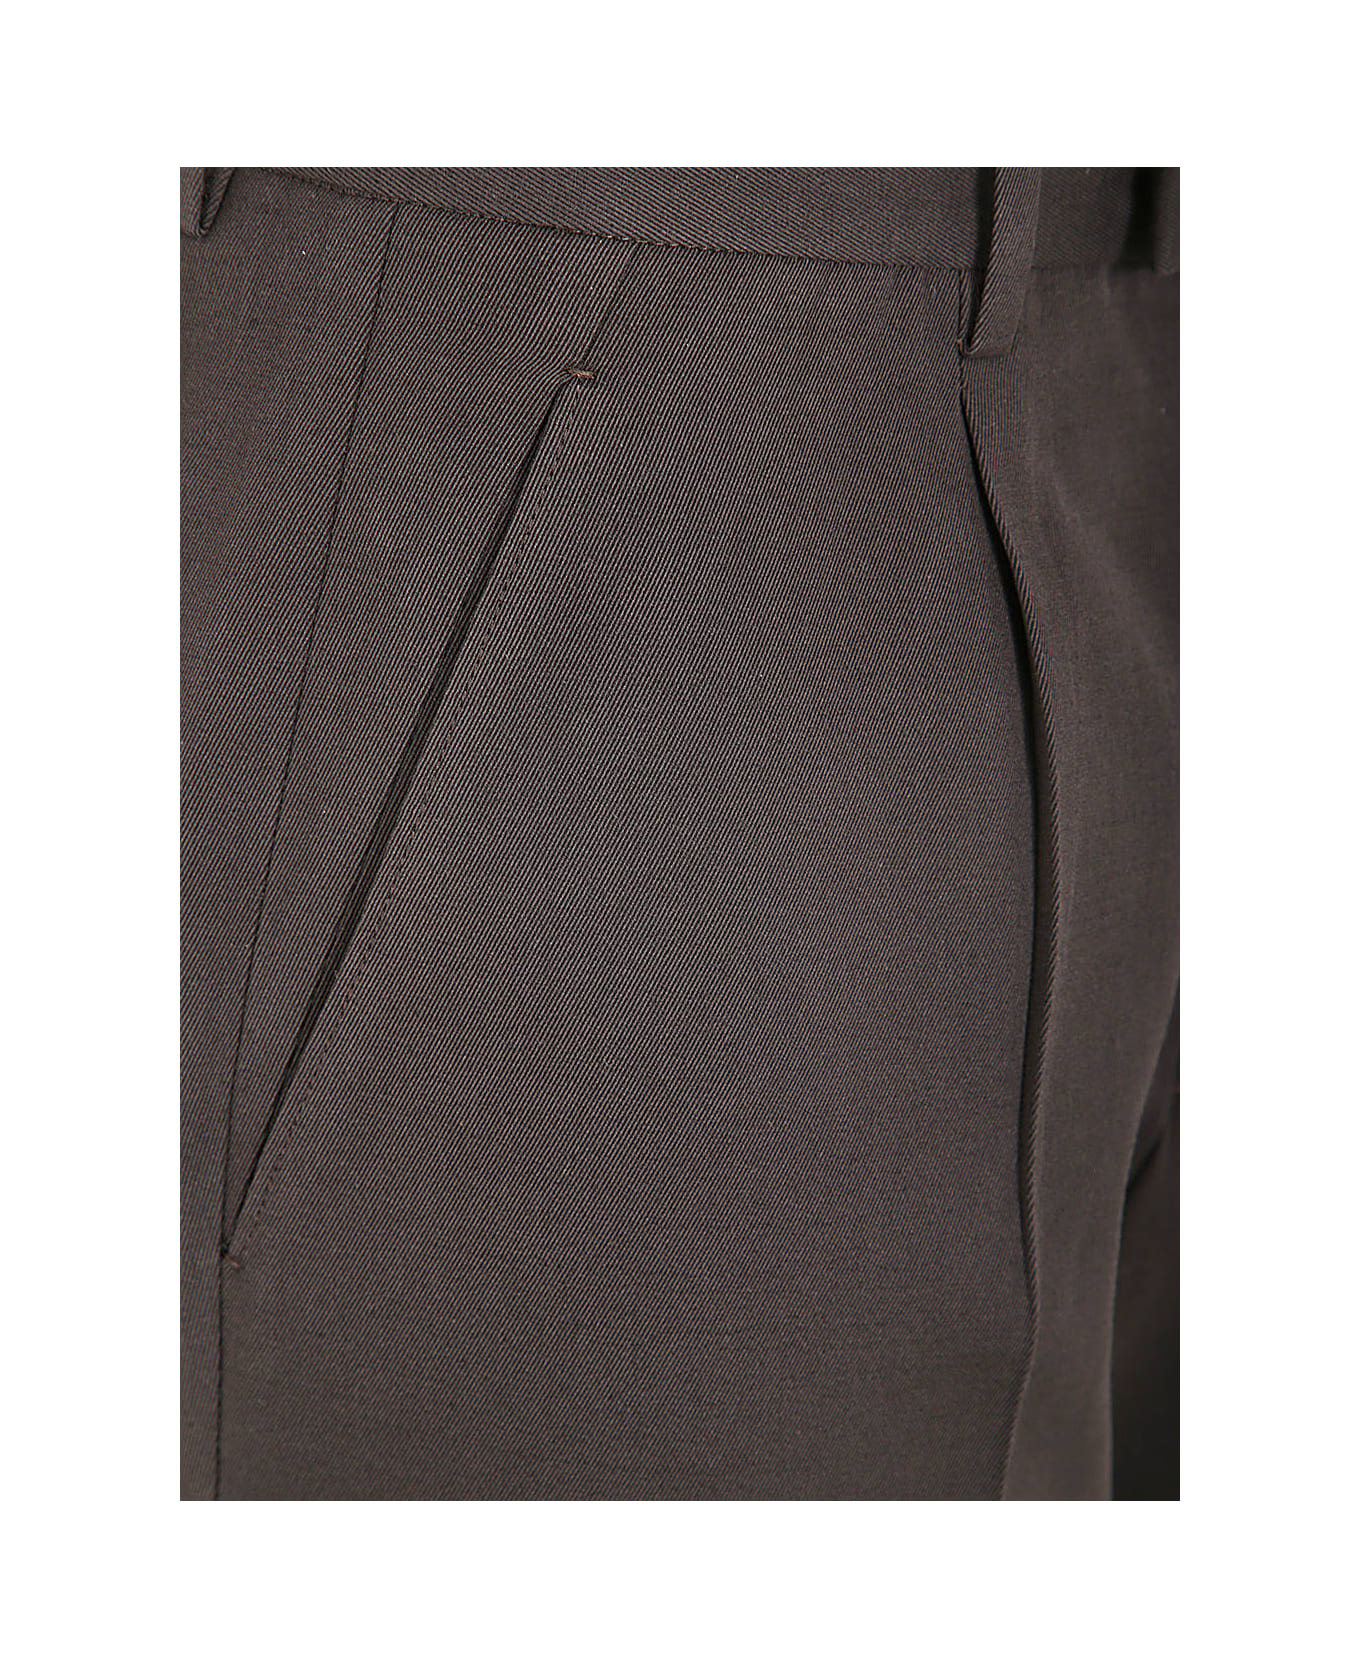 Zegna Cotton And Wool Pants - Brown